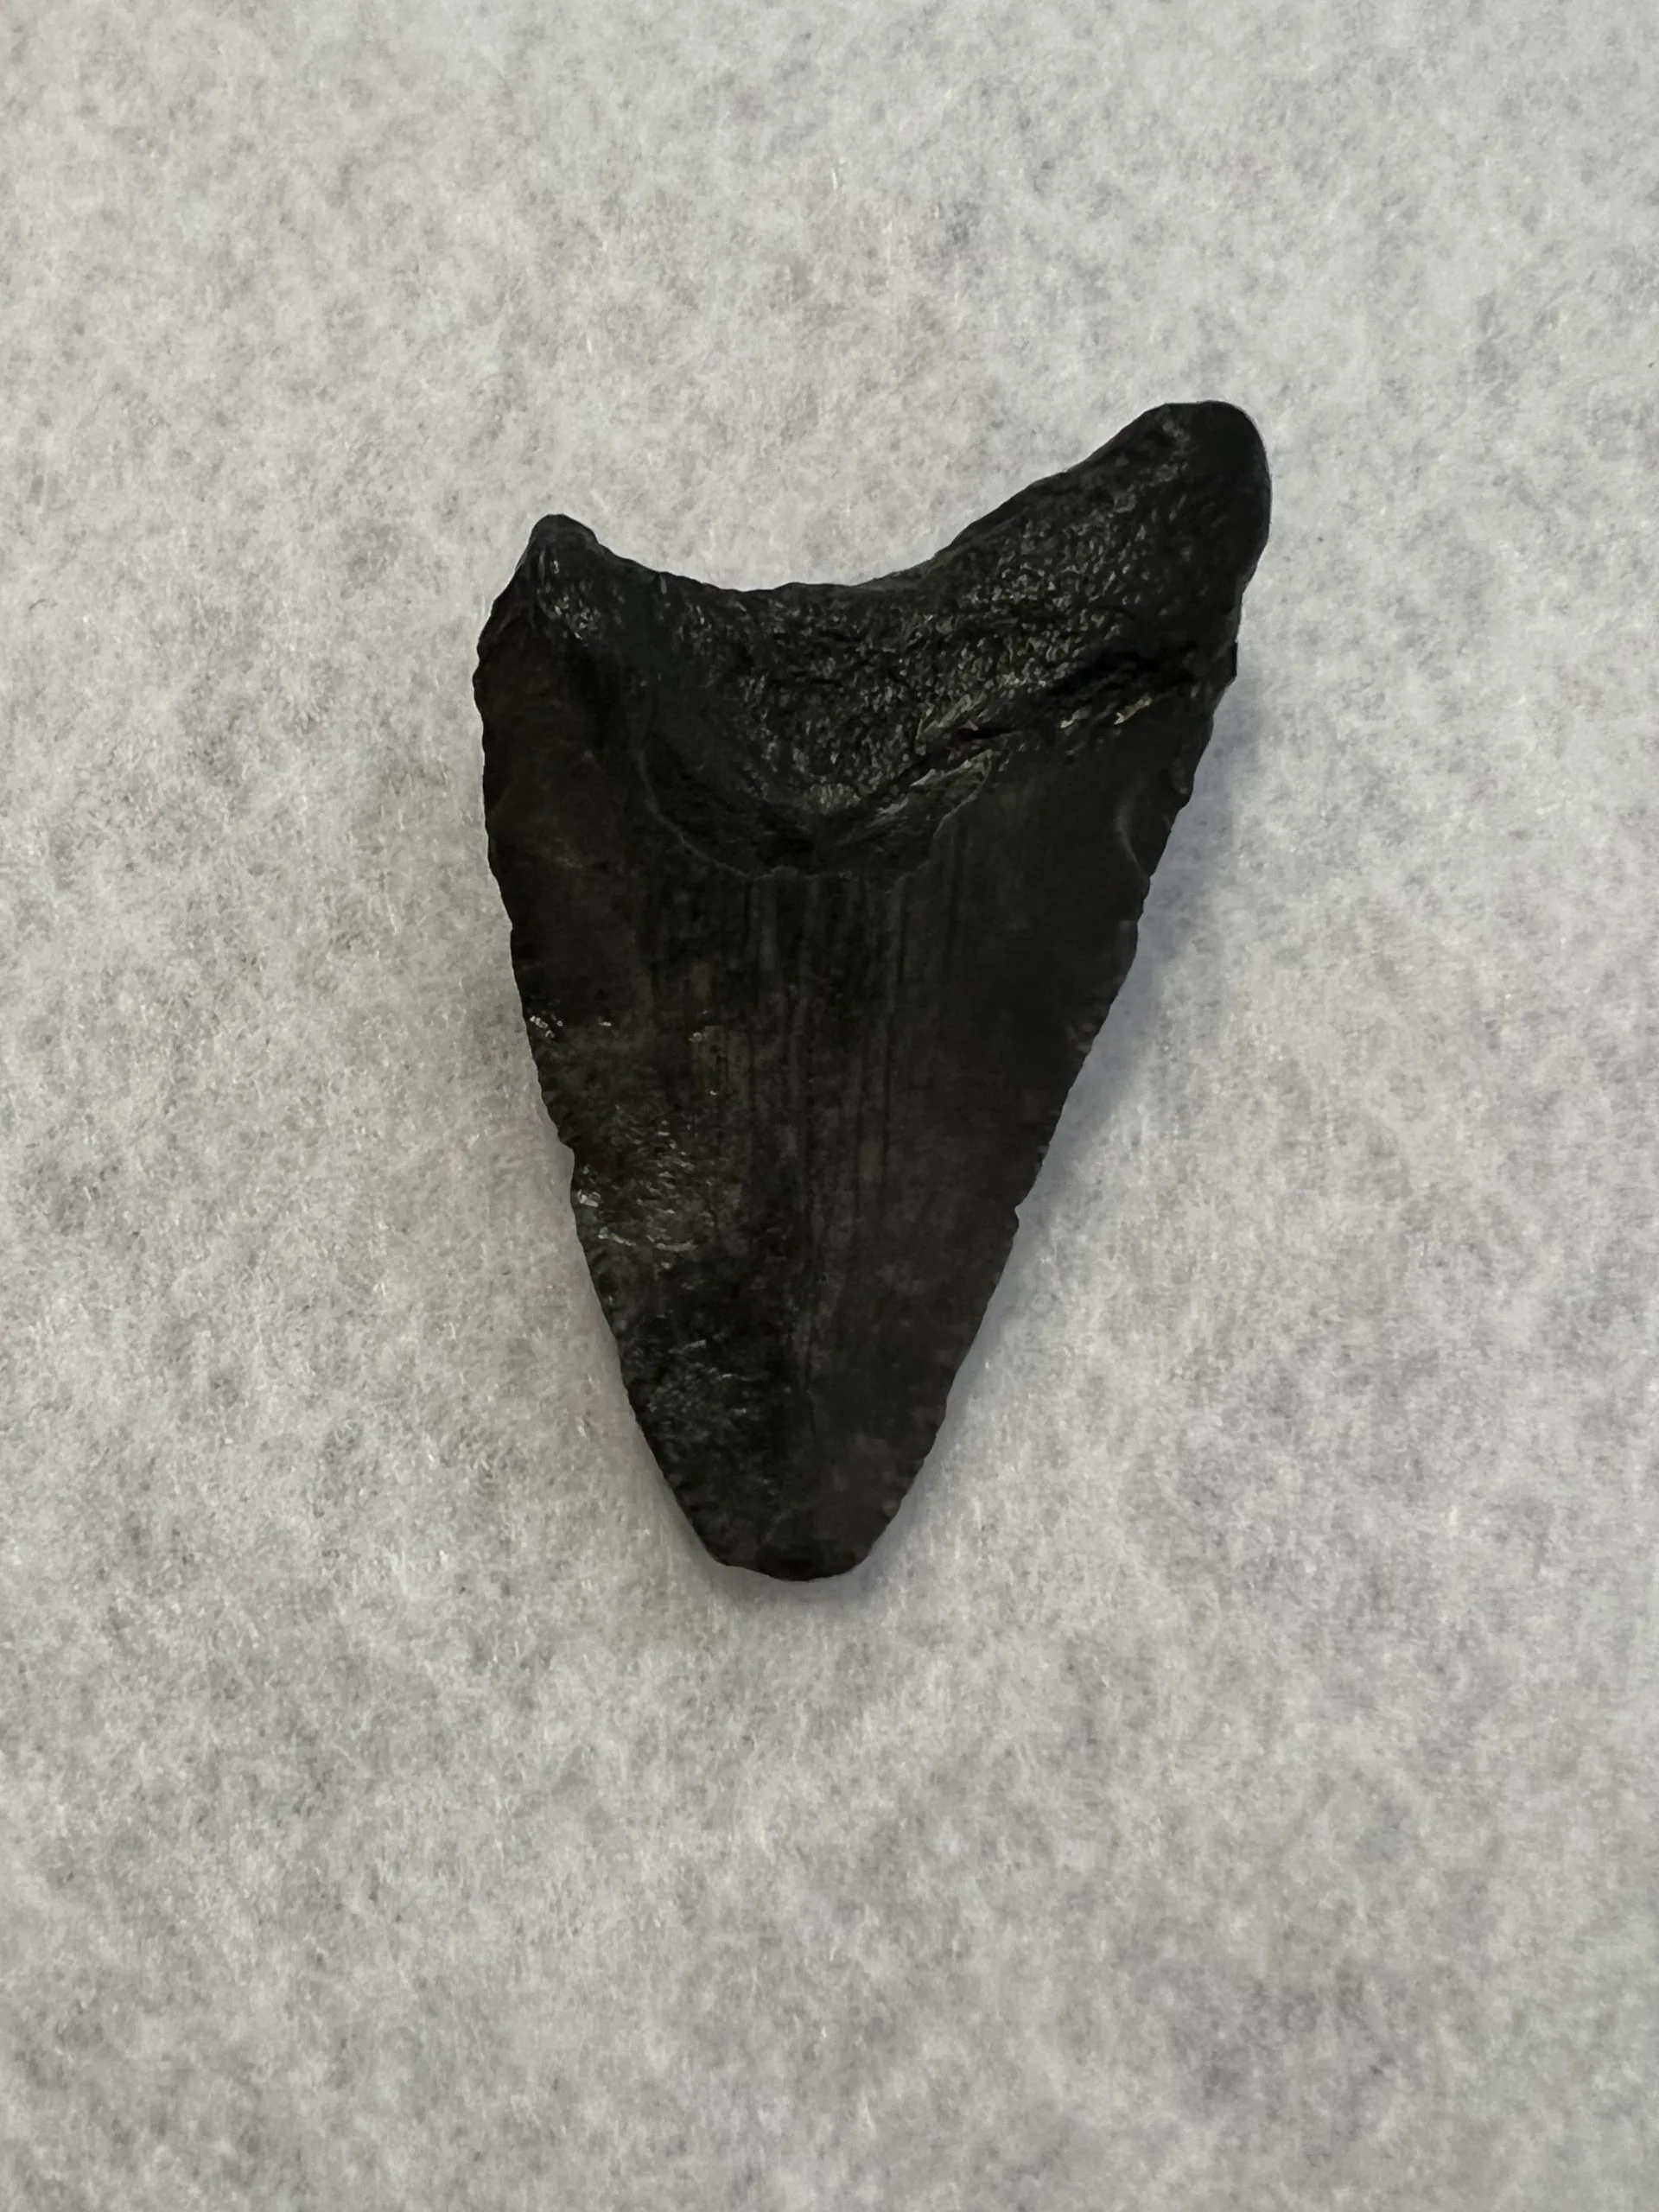 Megalodon Tooth South Carolina 2.26 inch Prehistoric Online